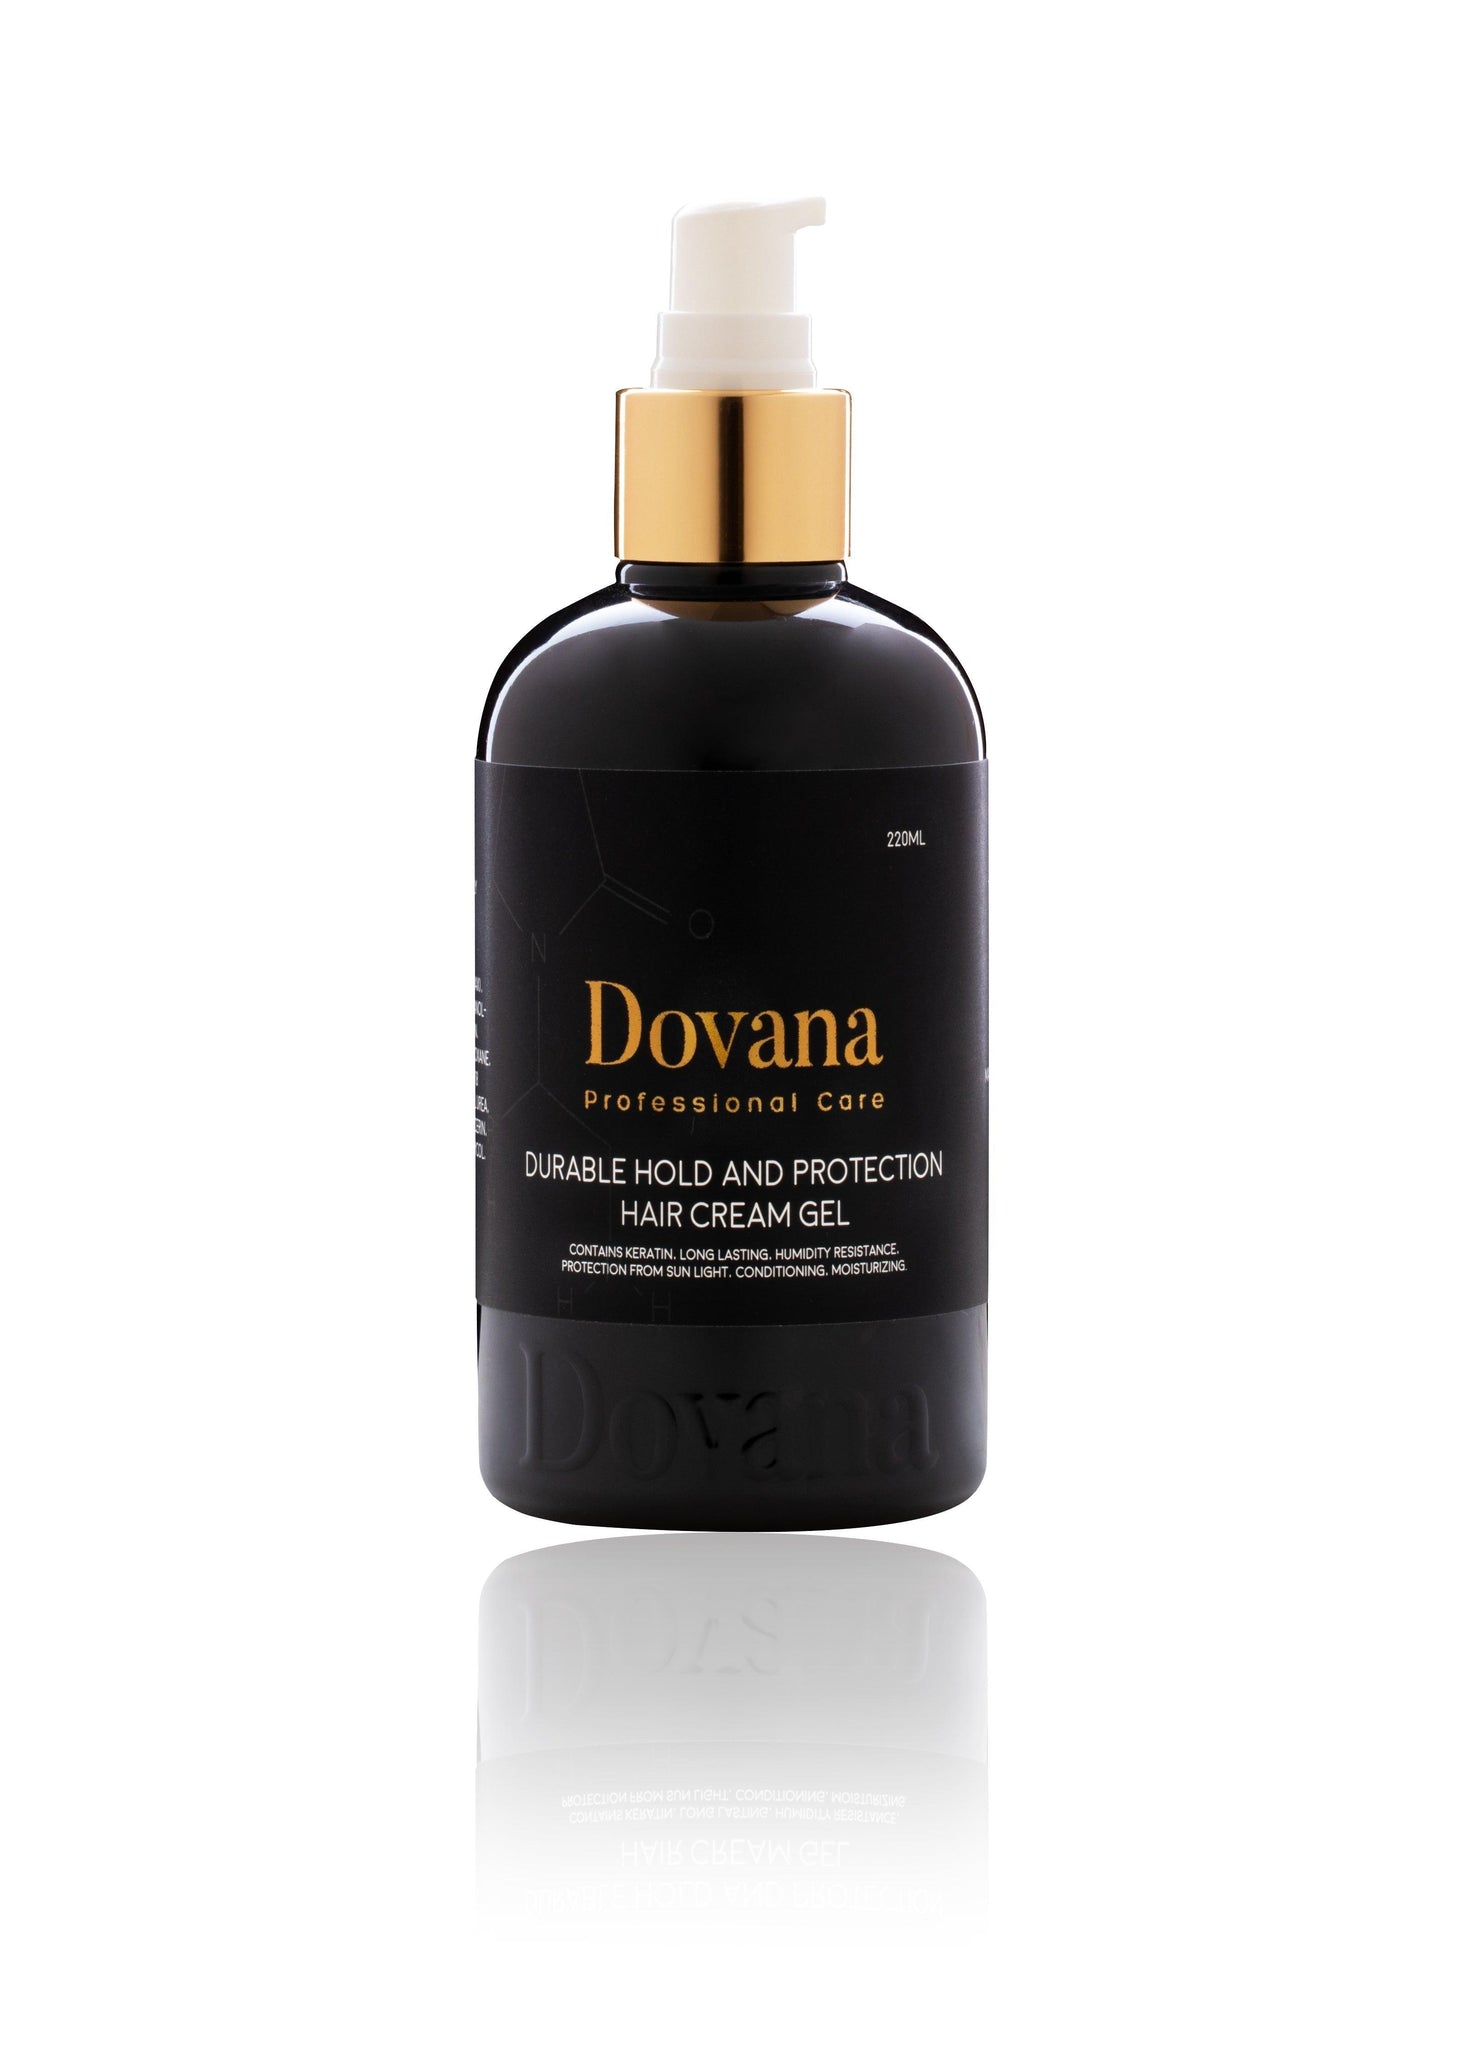 Dovana’s Durable Hold and Protection Hair Cream Gel 220 ml - Mrayti Store